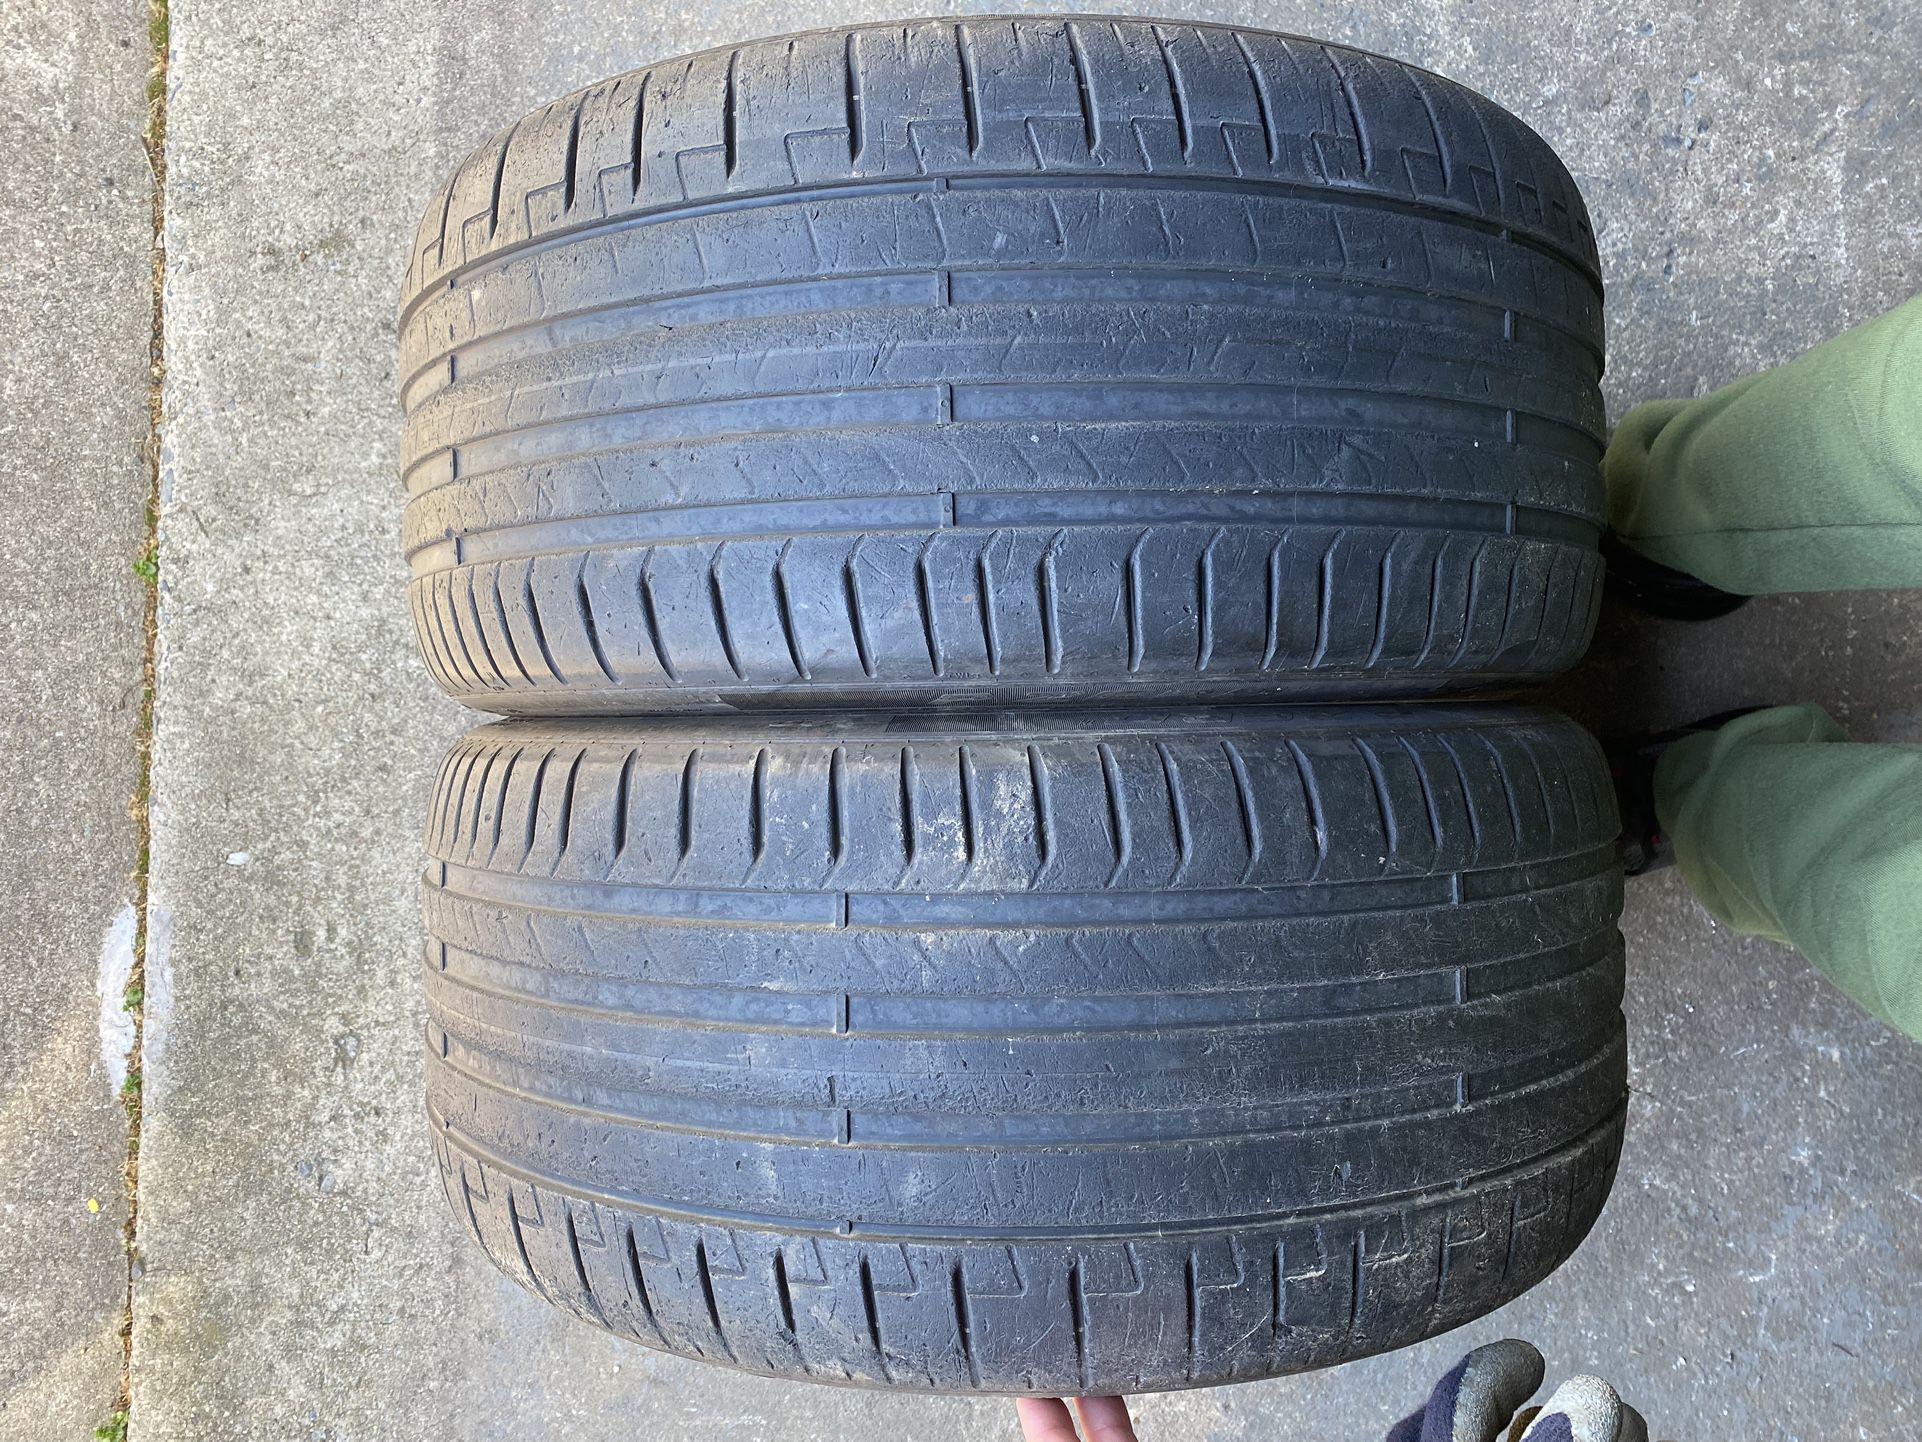 2) 265/30/19 Pirelli P Zero Tires  The Tires were driven on aggressively, but still useable.  Came off an Audi  $125 for Both  I carry other sizes 